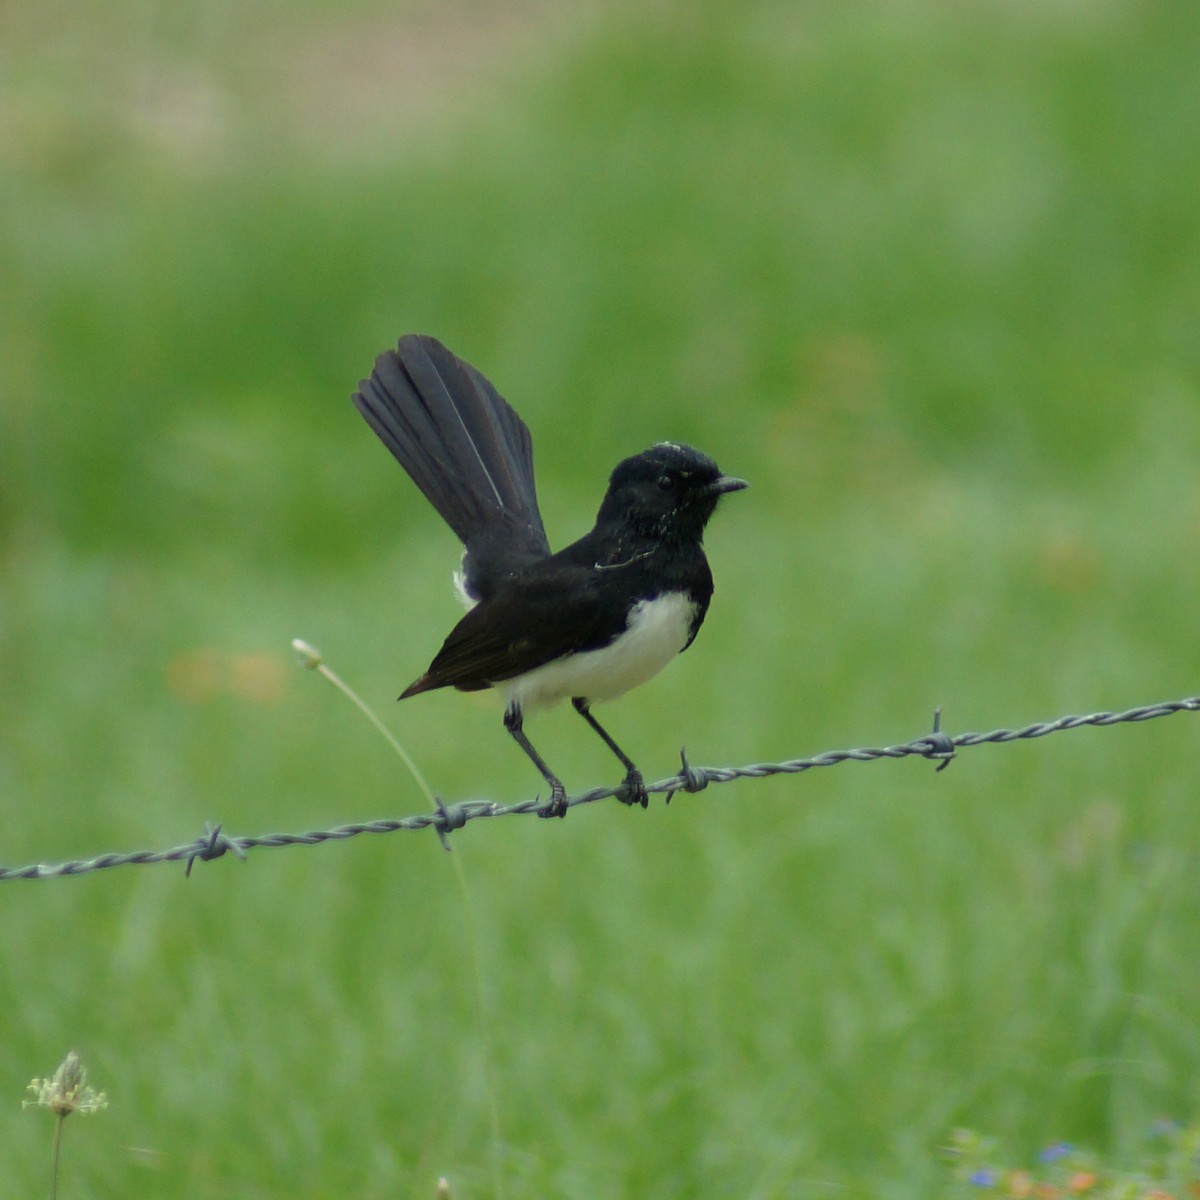 Willie-wagtail - Sara Young